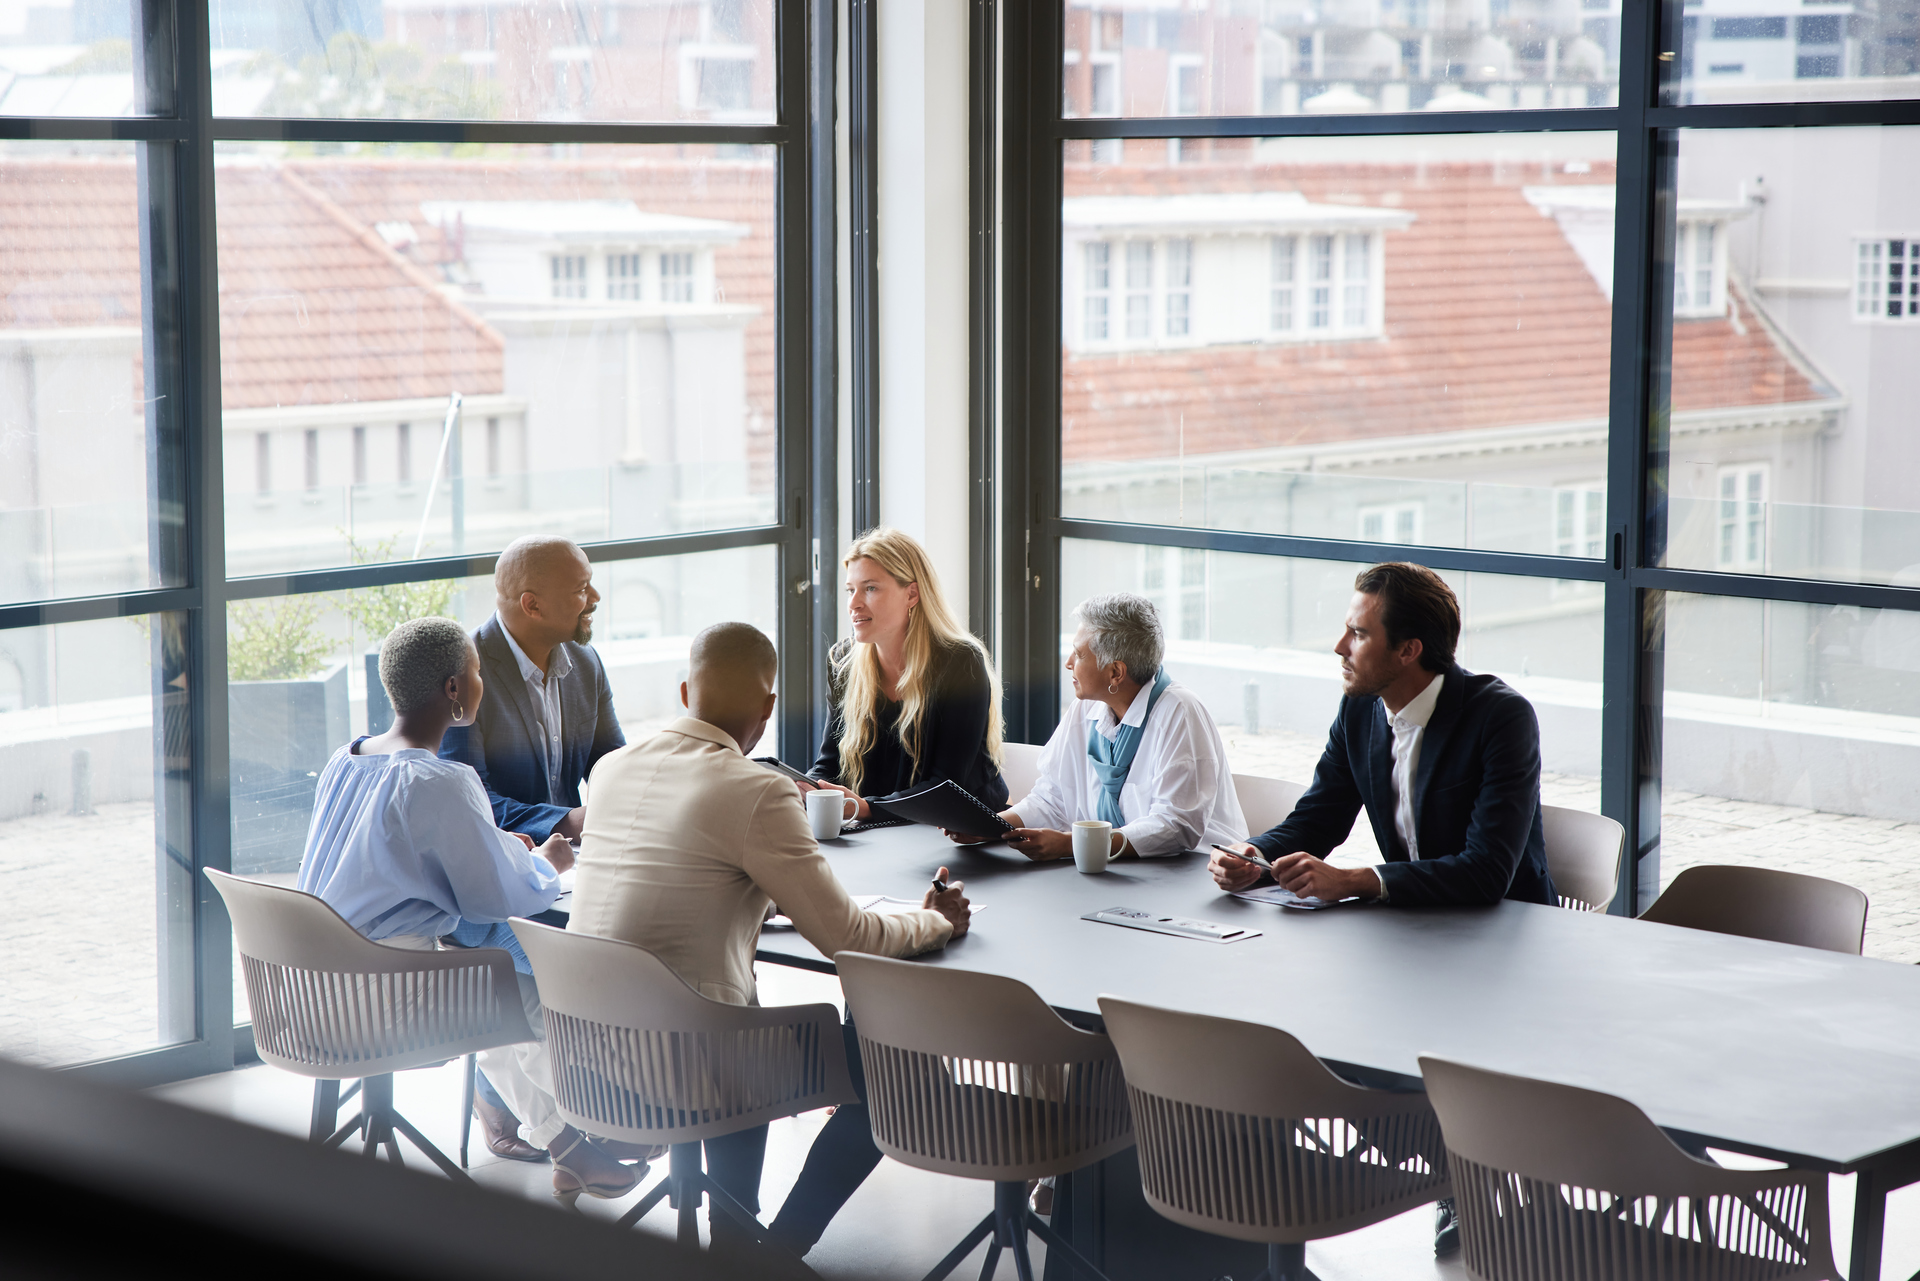 Diverse group of businesspeople talking together around a conference table during a boardroom meeting in a modern office